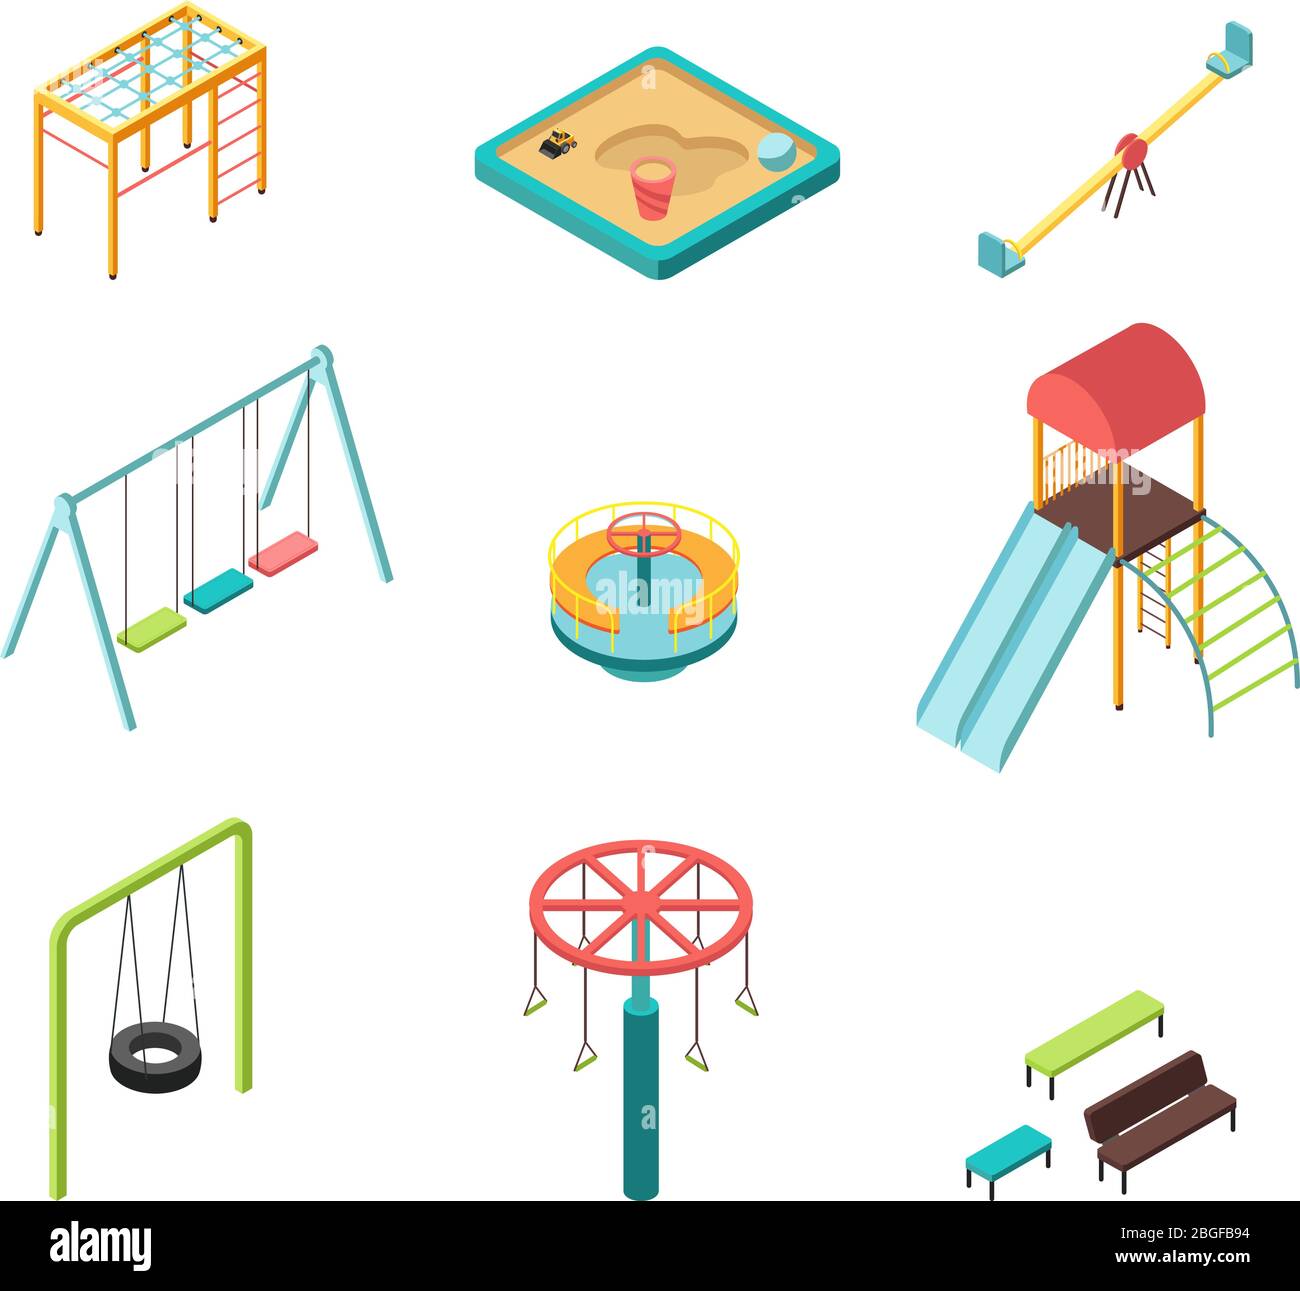 Isometric 3D outdoor kids playground vector cartoon elements isolated. Illustration of slide and swing, ladder and sandpit for playground Stock Vector